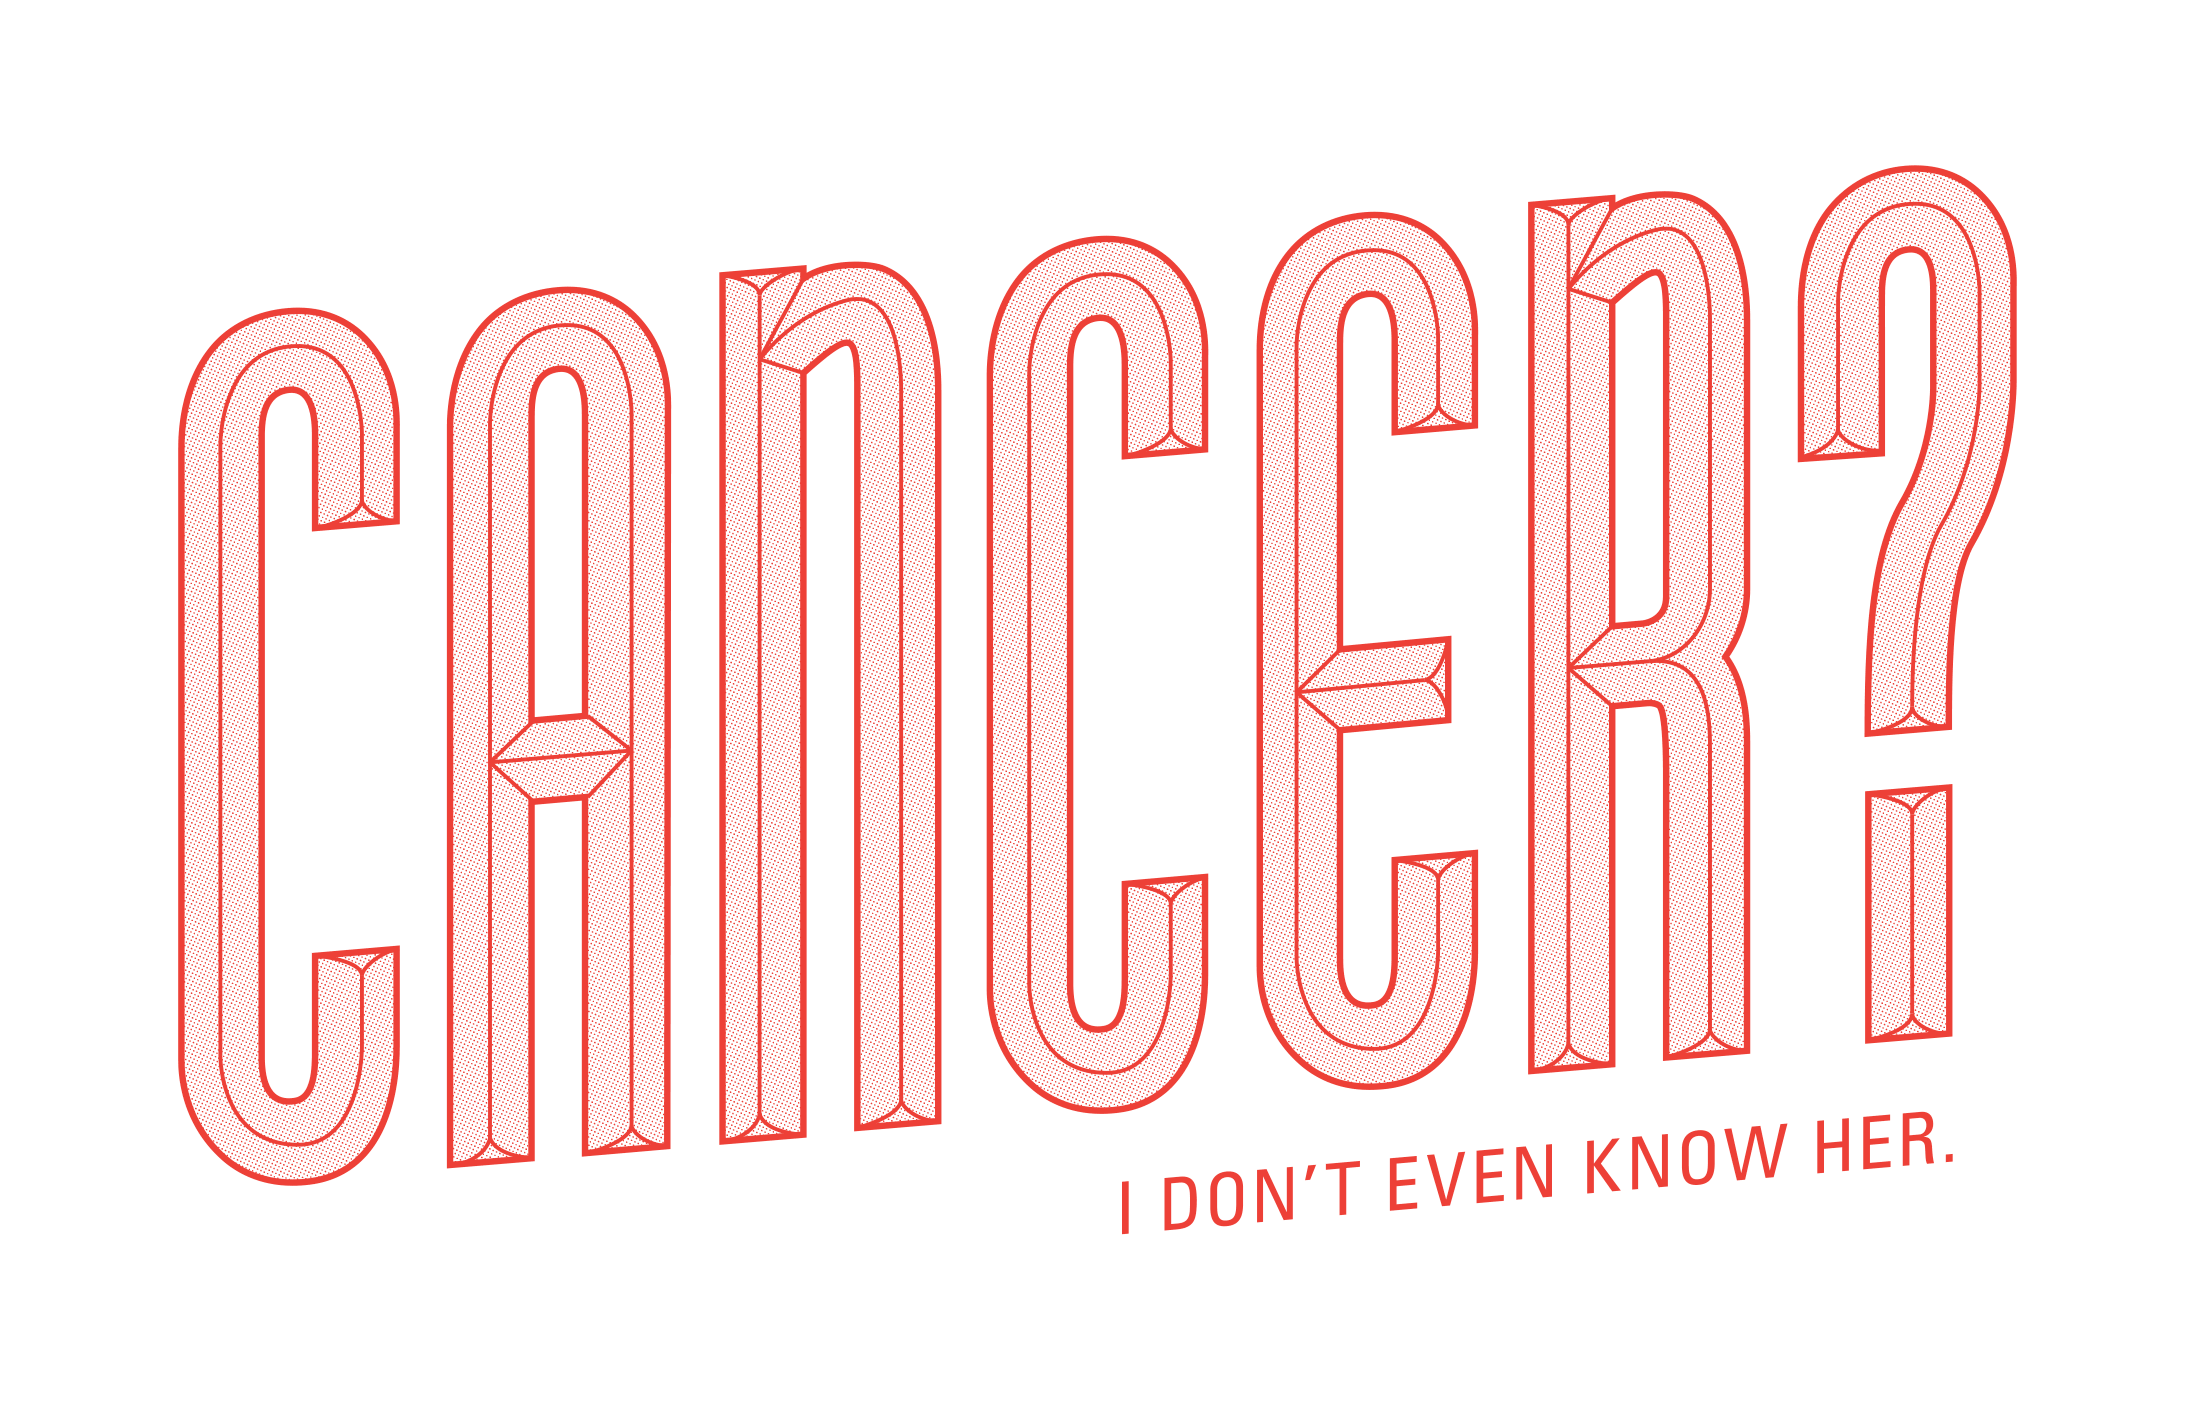 The Cancer? I don't even know her. logo.